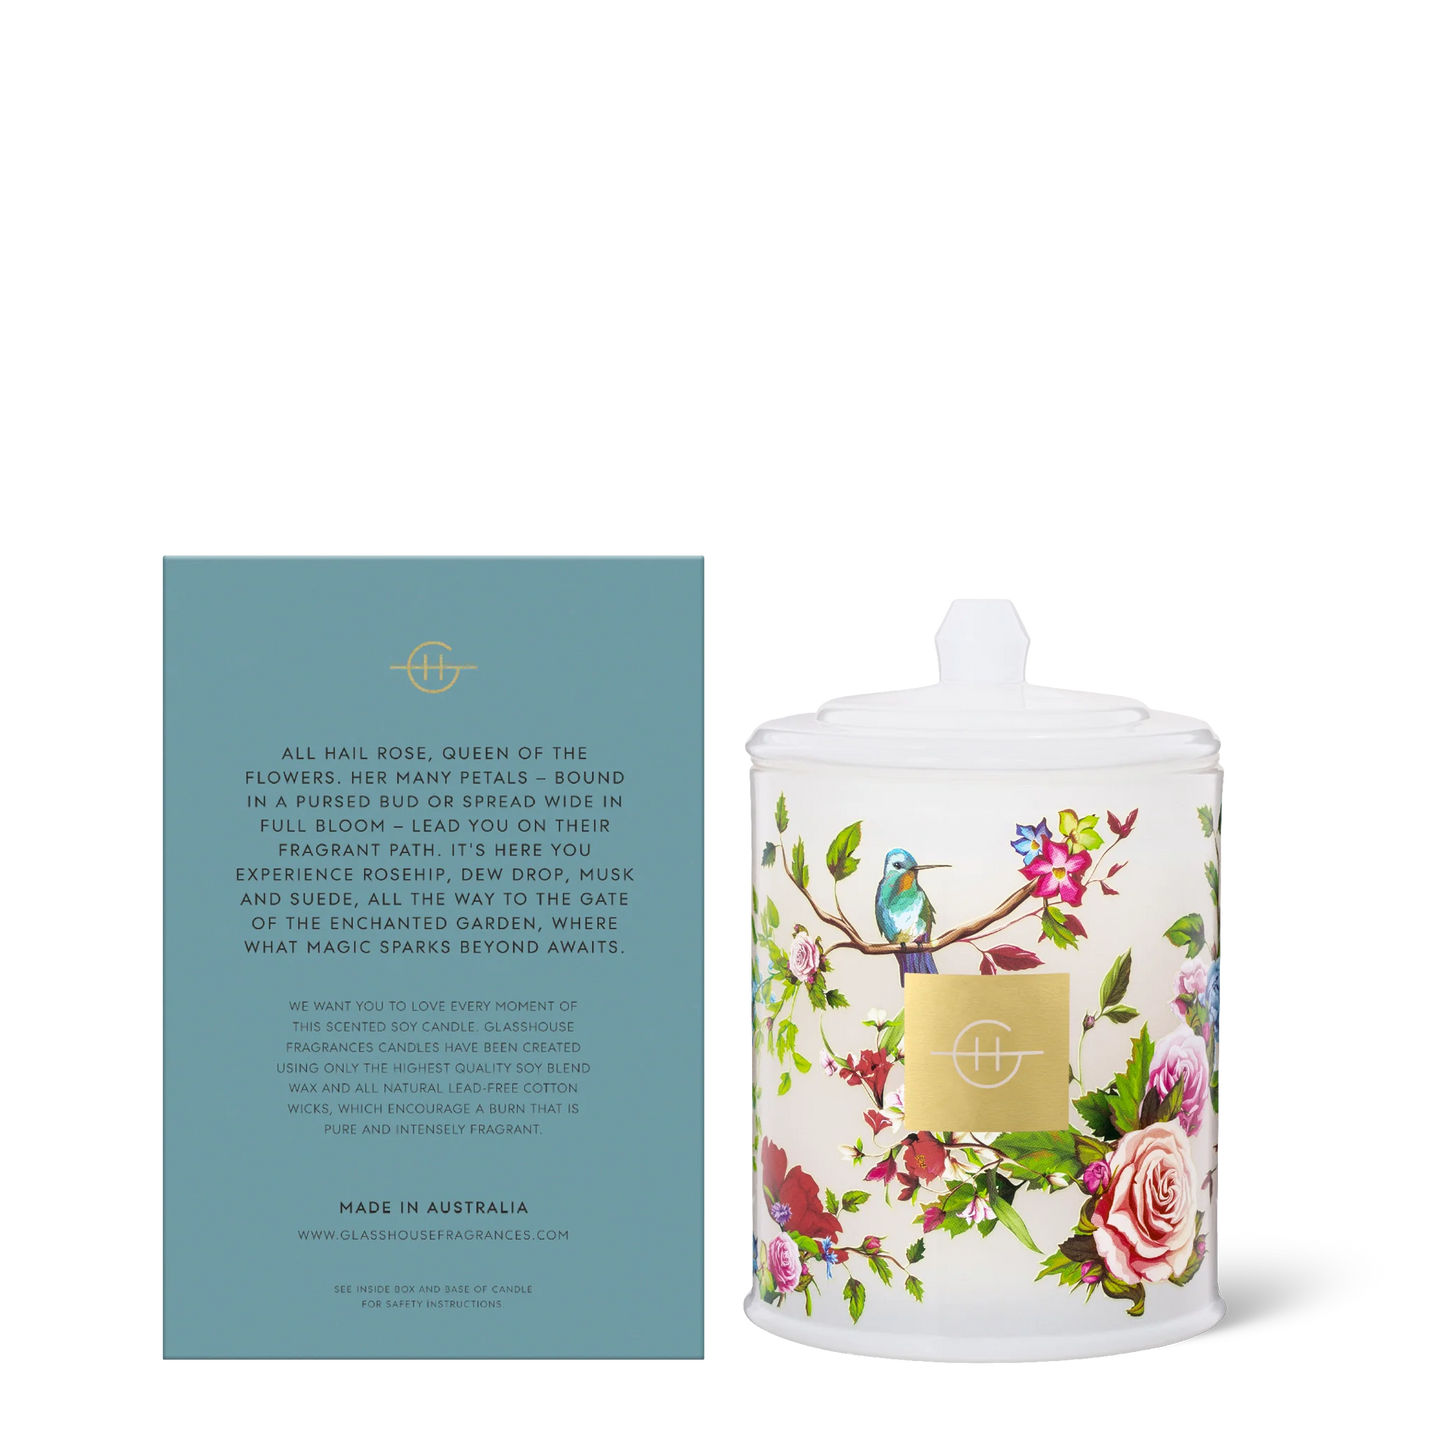 Enchanted Garden - Mother's Day Limited Edition Soy Candle - 380g